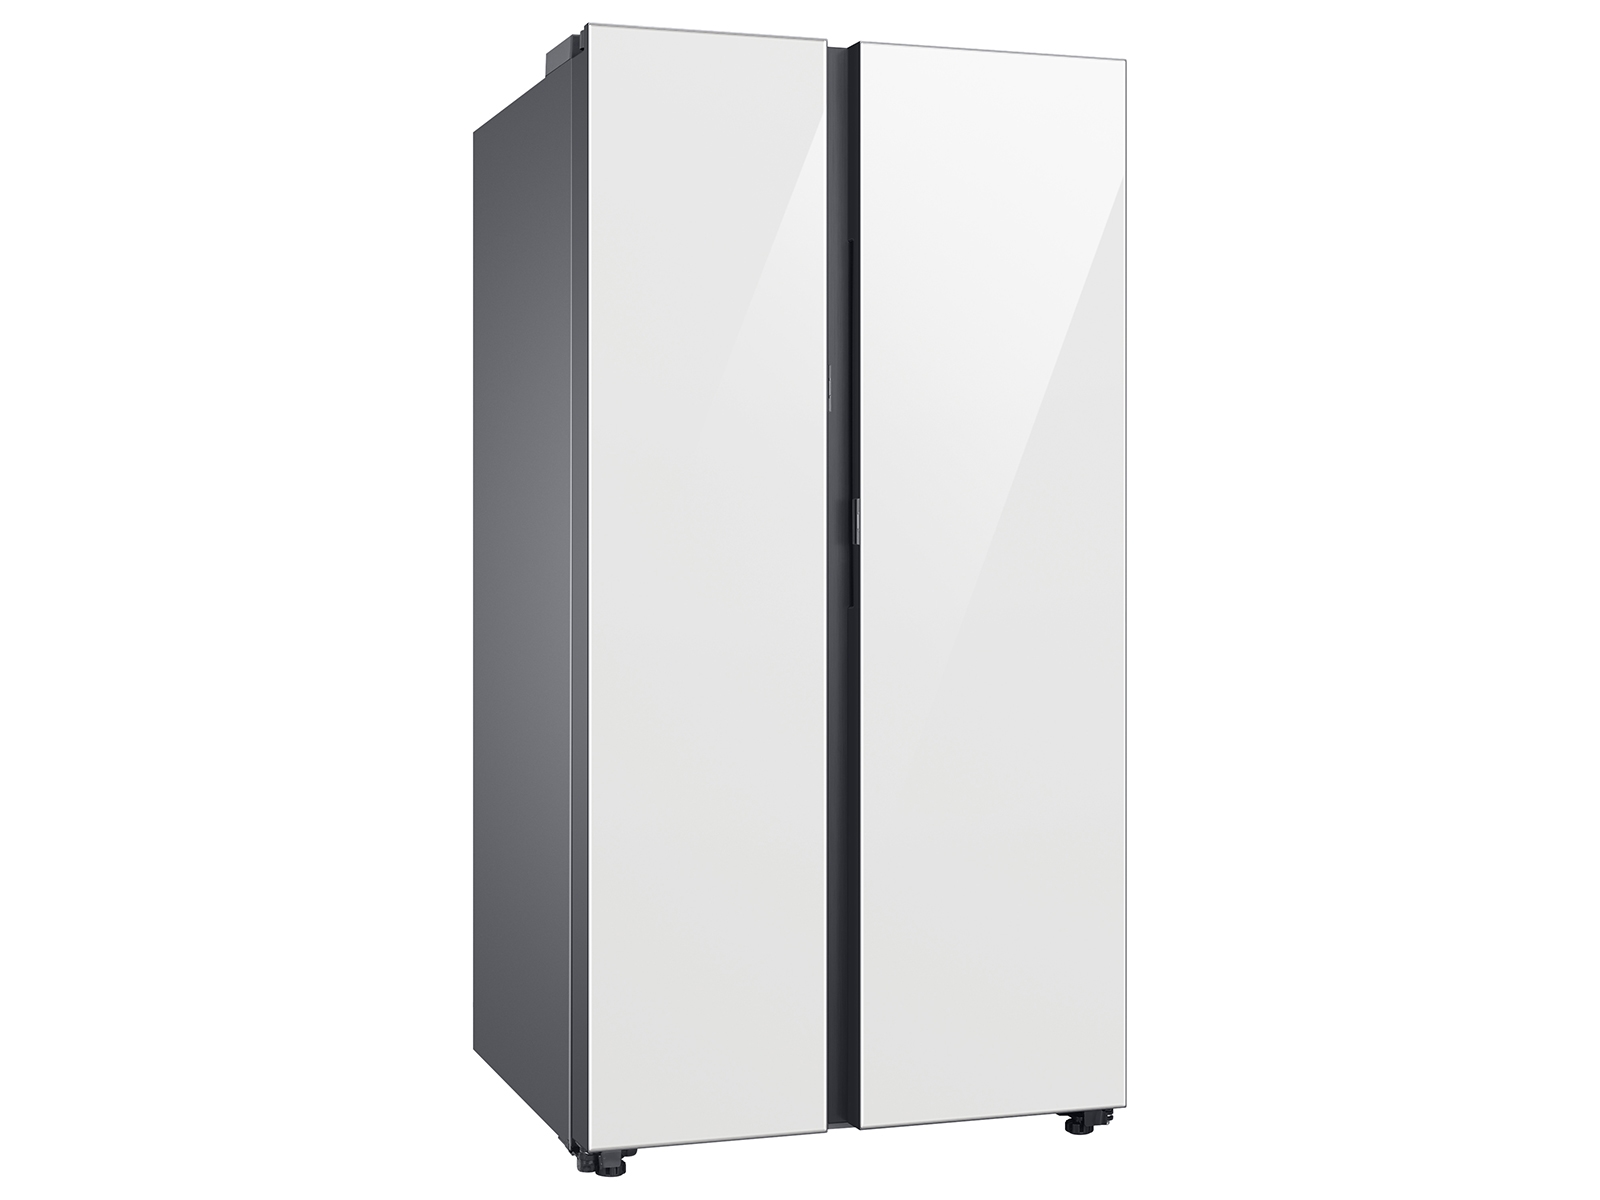 Bespoke 28 with in | US ft. Beverage Samsung cu. Glass Refrigerator Center White Side-by-side